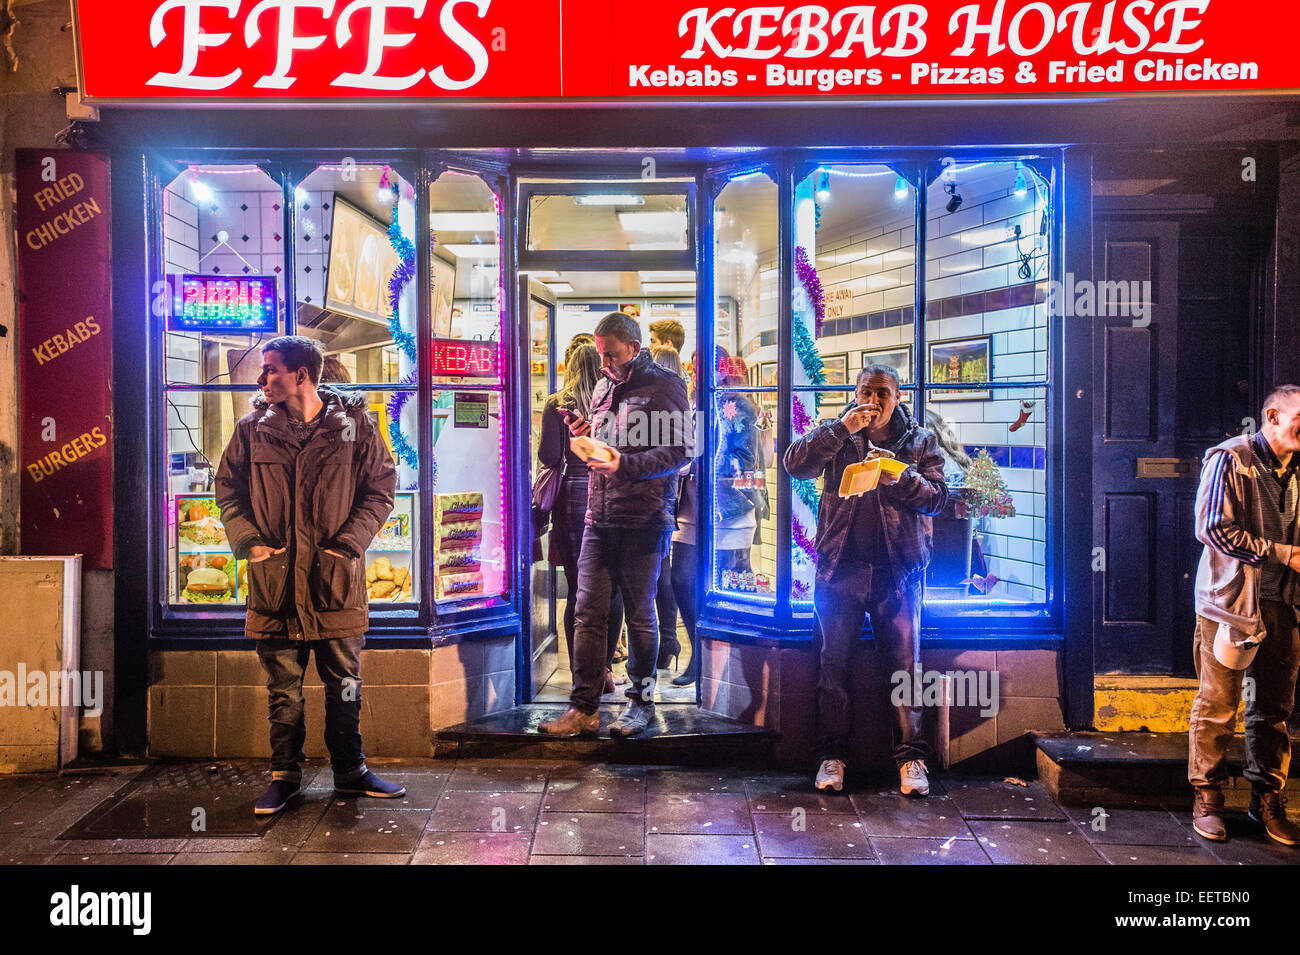 People  in Aberystwyth outside a kebab house shop food store eating take-away food late at night after celebrating the 2015 new year. UK Stock Photo